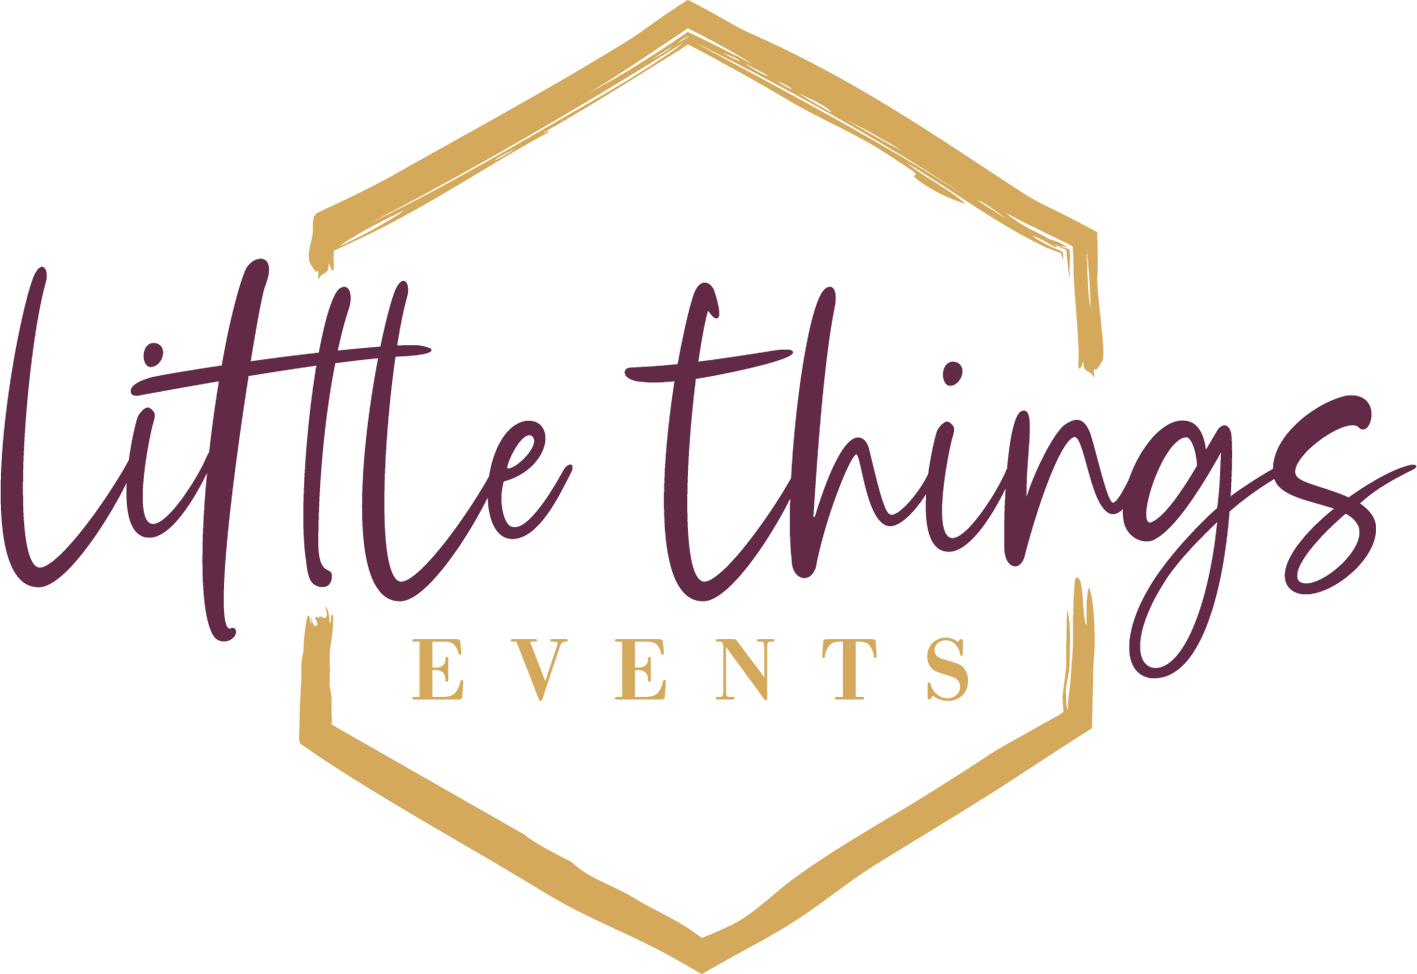 Little Things Events